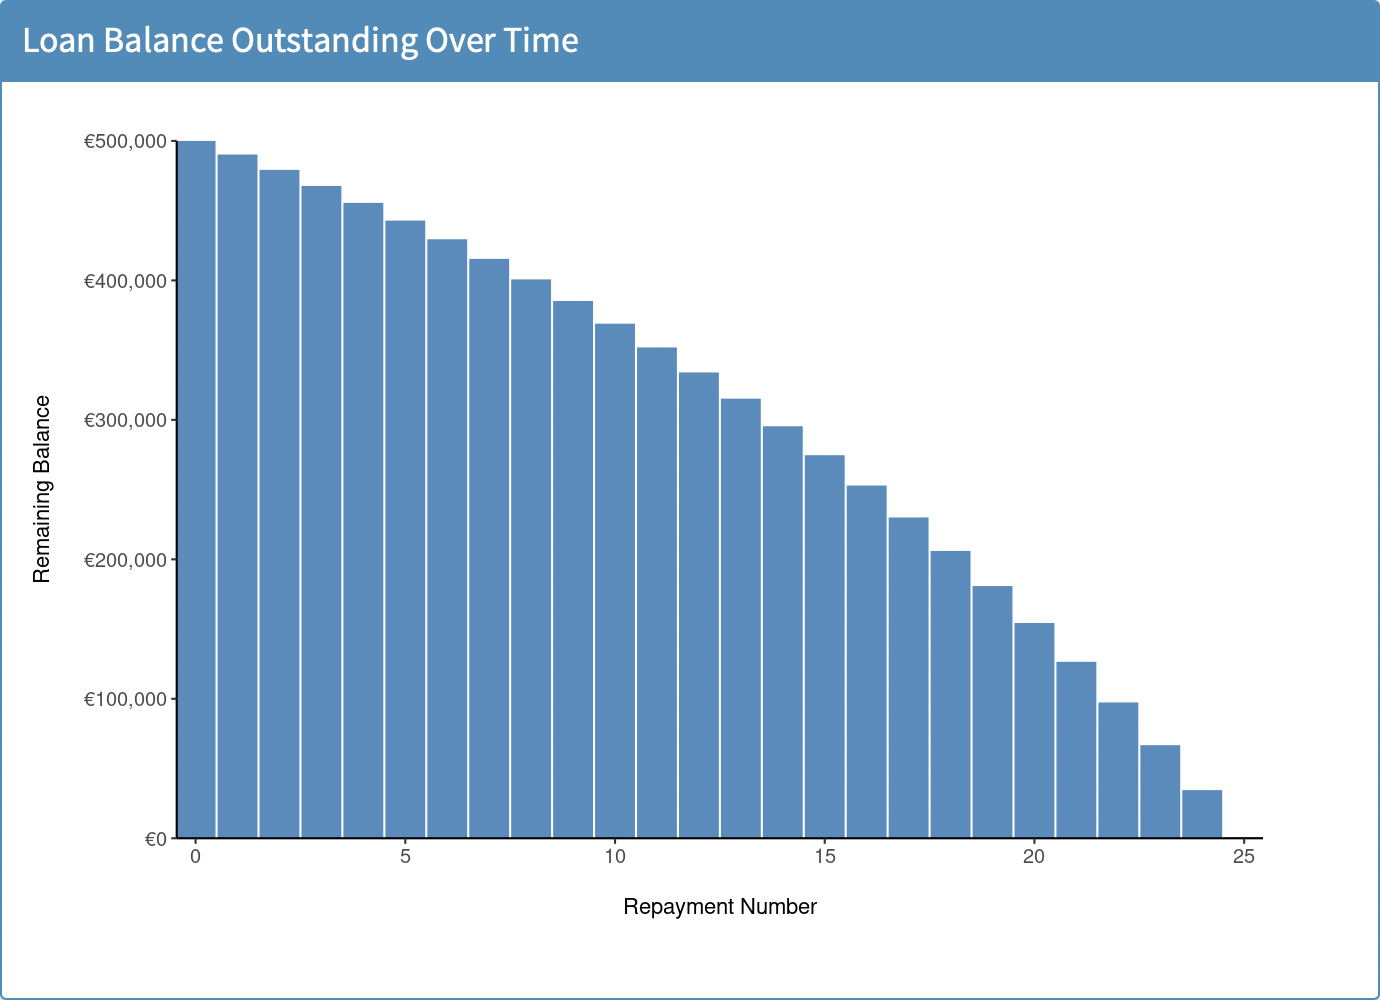 Loan Balance Outstanding Over Time